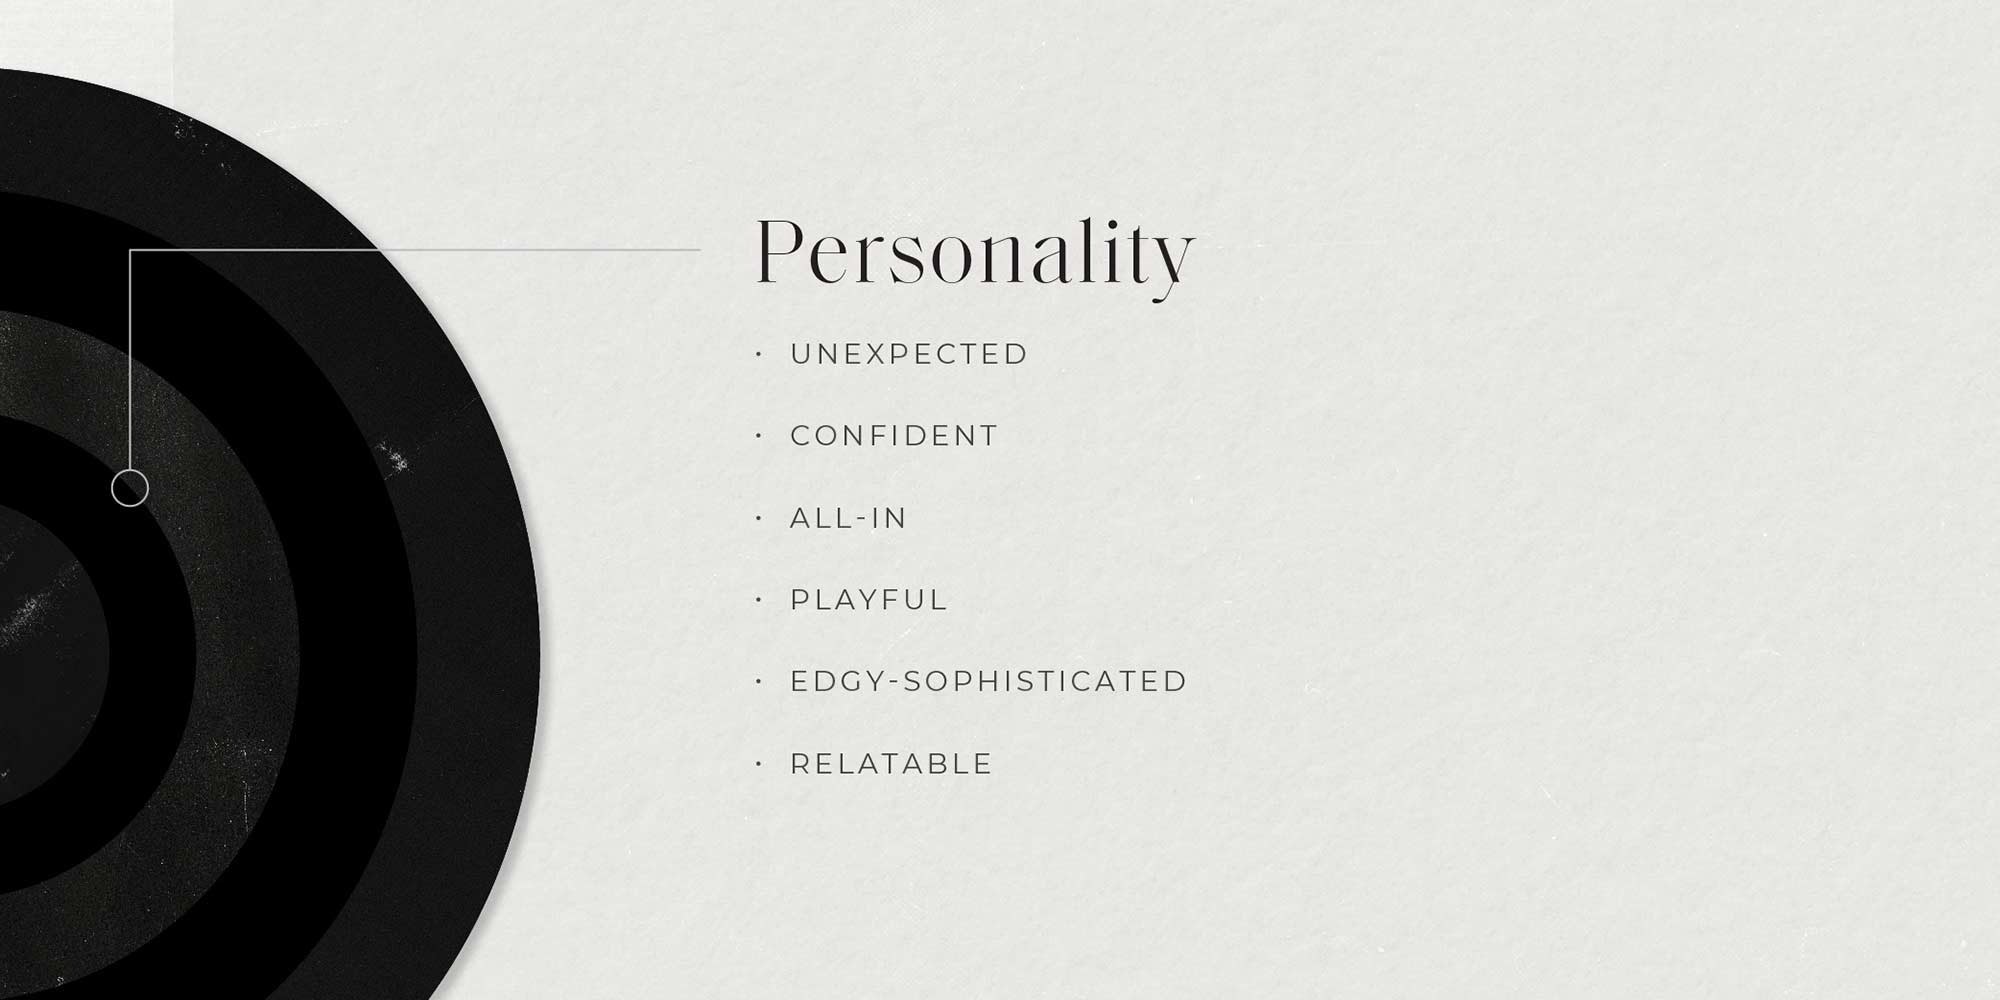 The personality section of the brand wheel